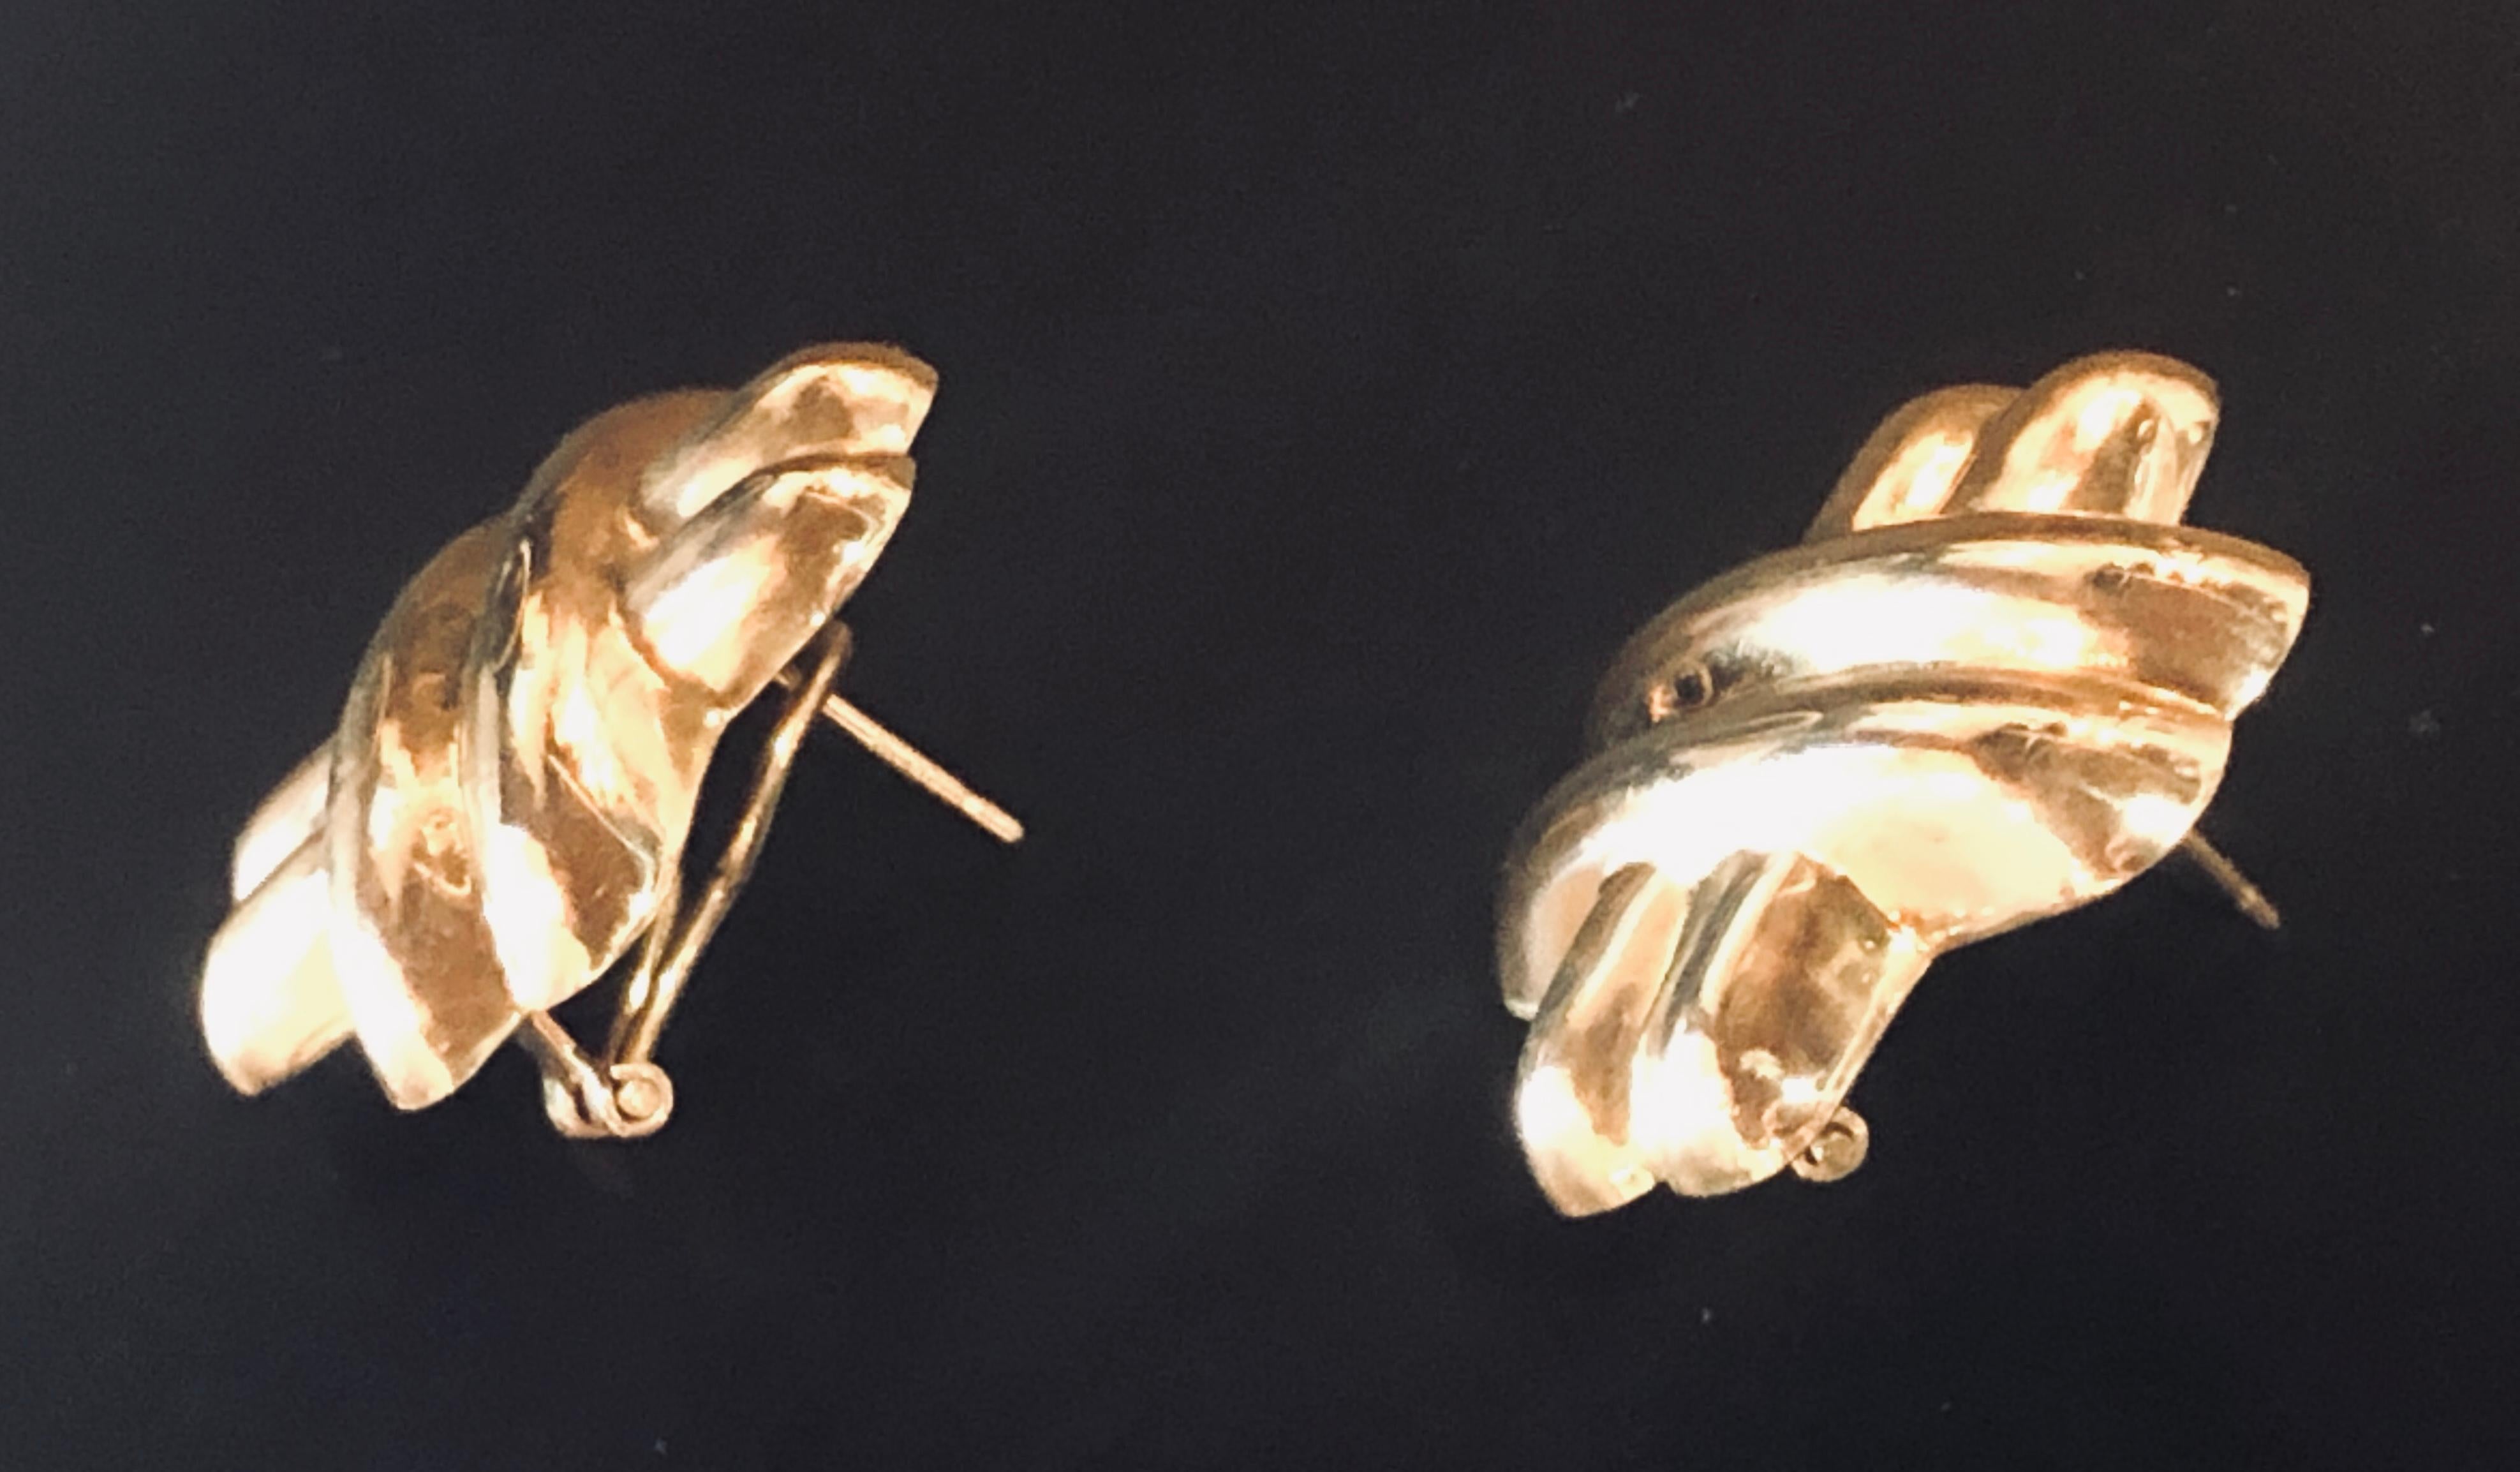 Pair 14 Karat Yellow Gold Large Criss-Cross Style Earrings. Total weight 10 grams. The dimensions are 1 inch by 1 inch with pierced clip backs.